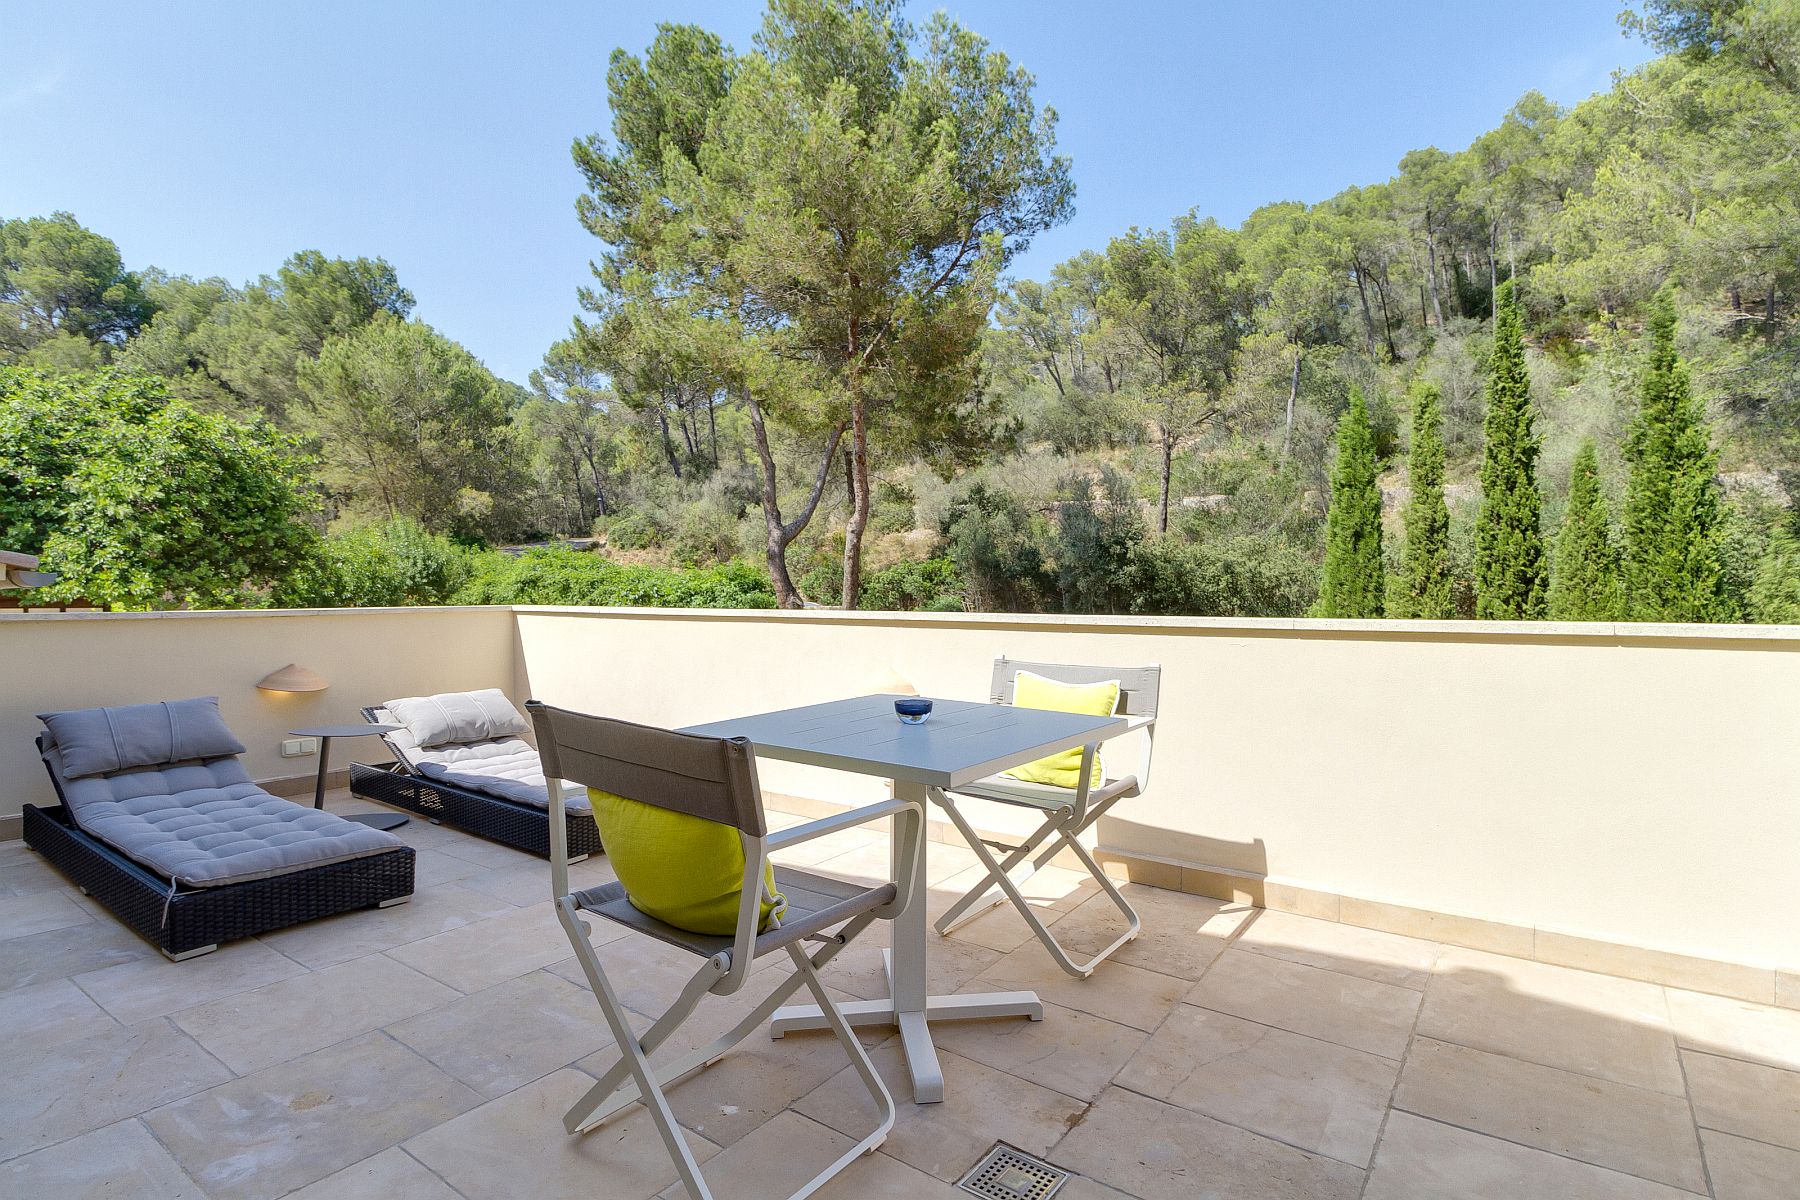 Beautiful & stylish country home in Calvia